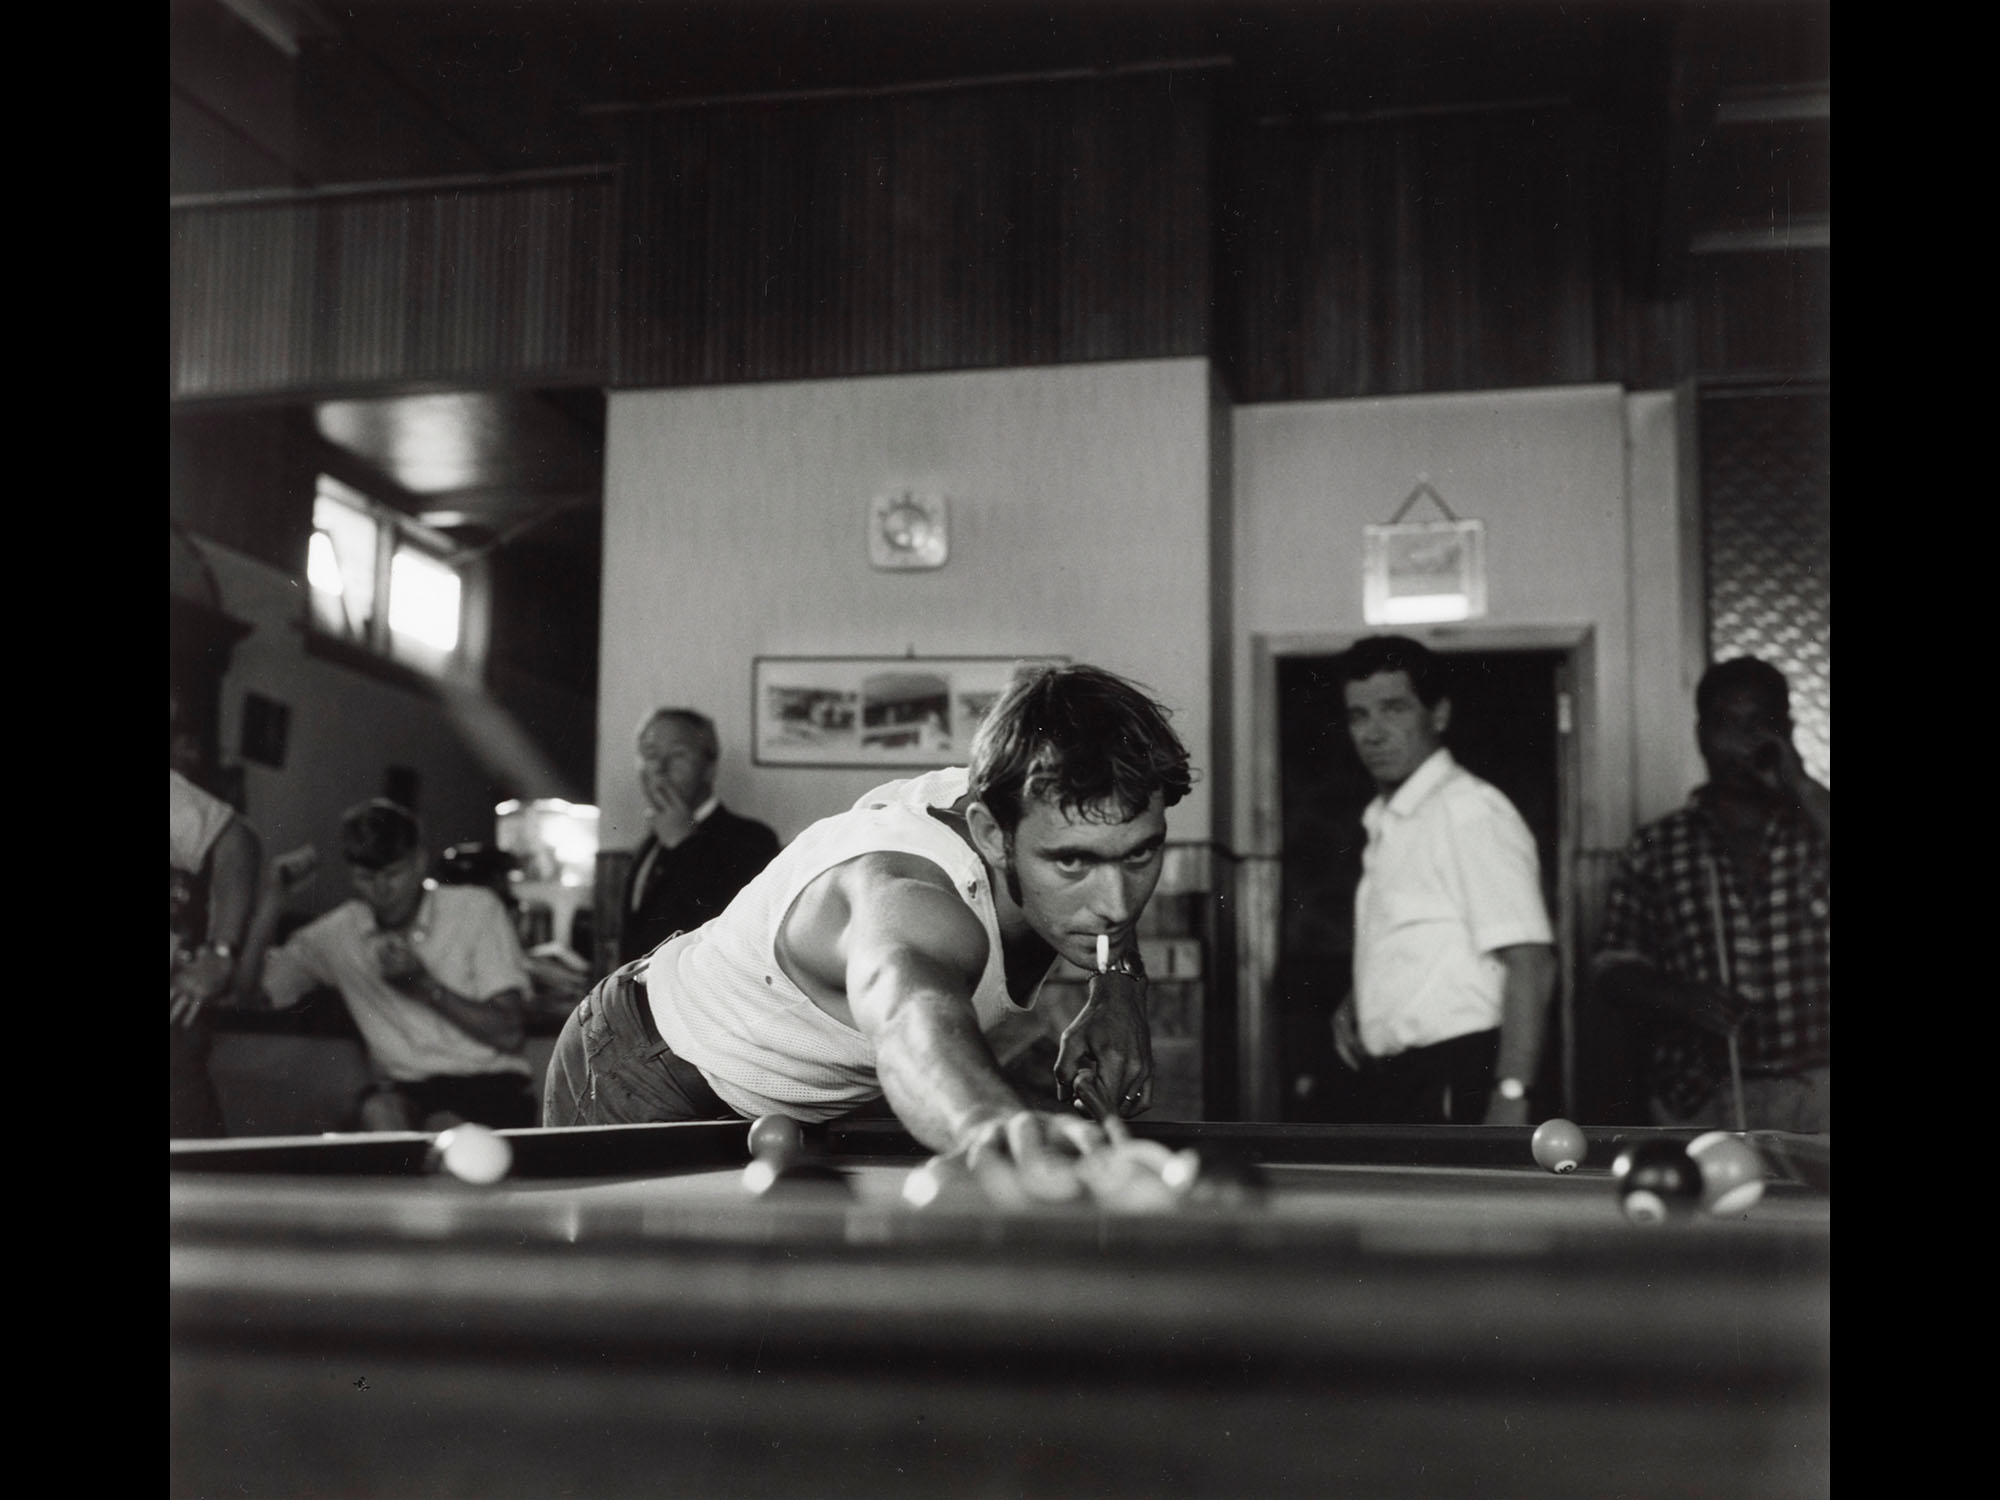 Low-angle shot of a man with a cigarette in his mouth playing pool while other men stand around behind him